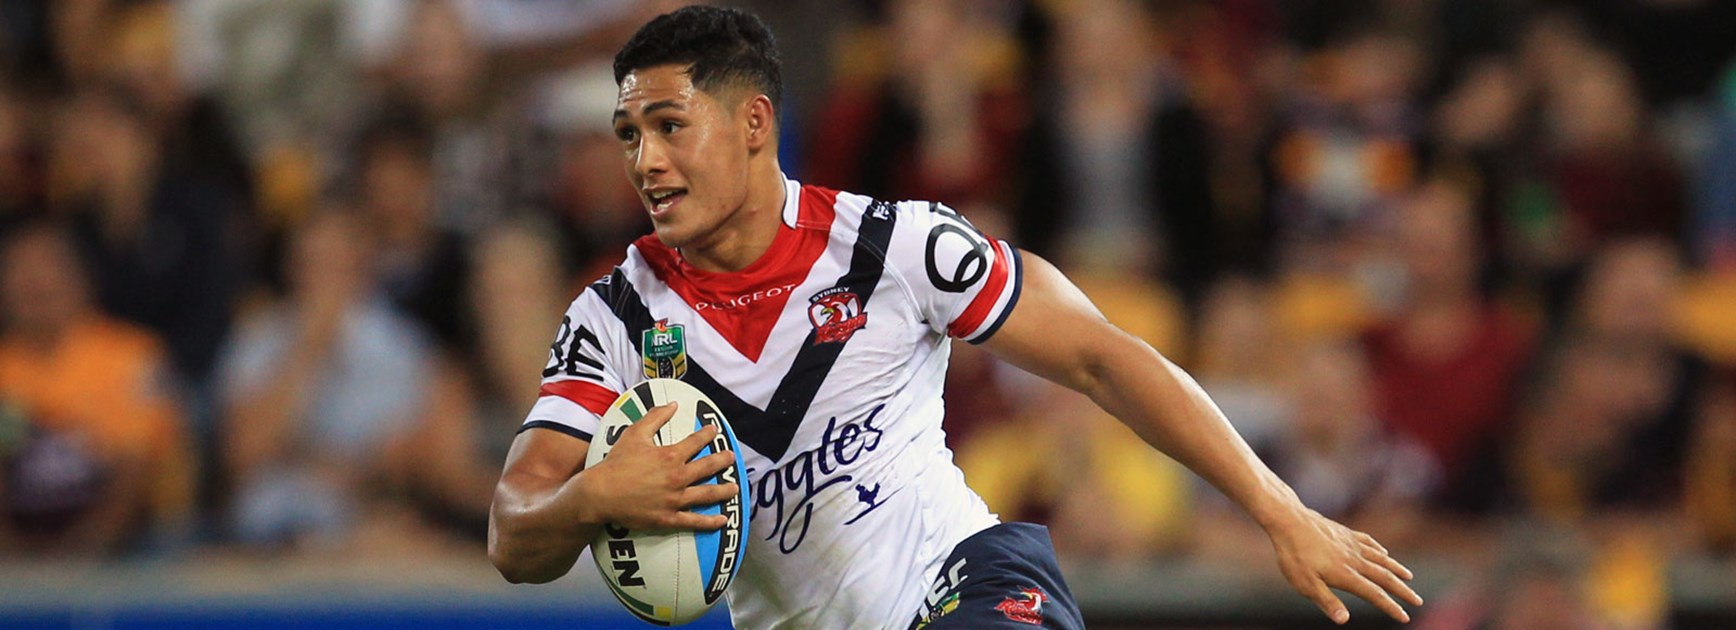 Roger Tuivasa-Sheck ran for 288 metres against the Broncos in Round 6.